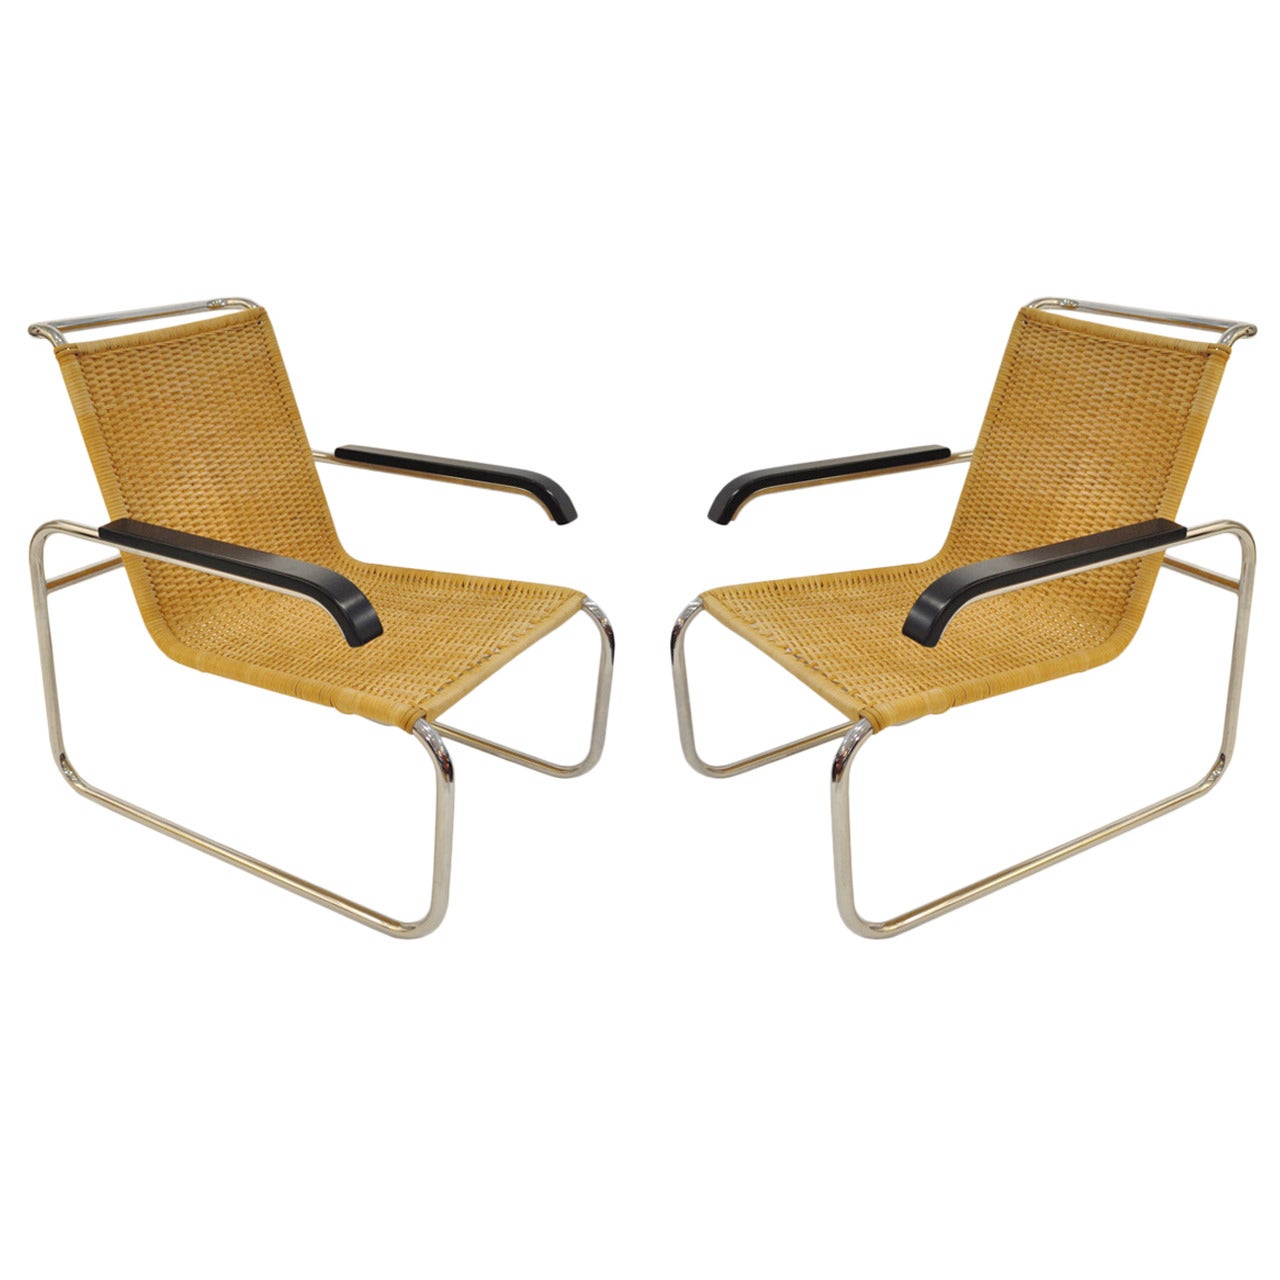 Pair of Marcel Breuer B35 Lounge Chairs